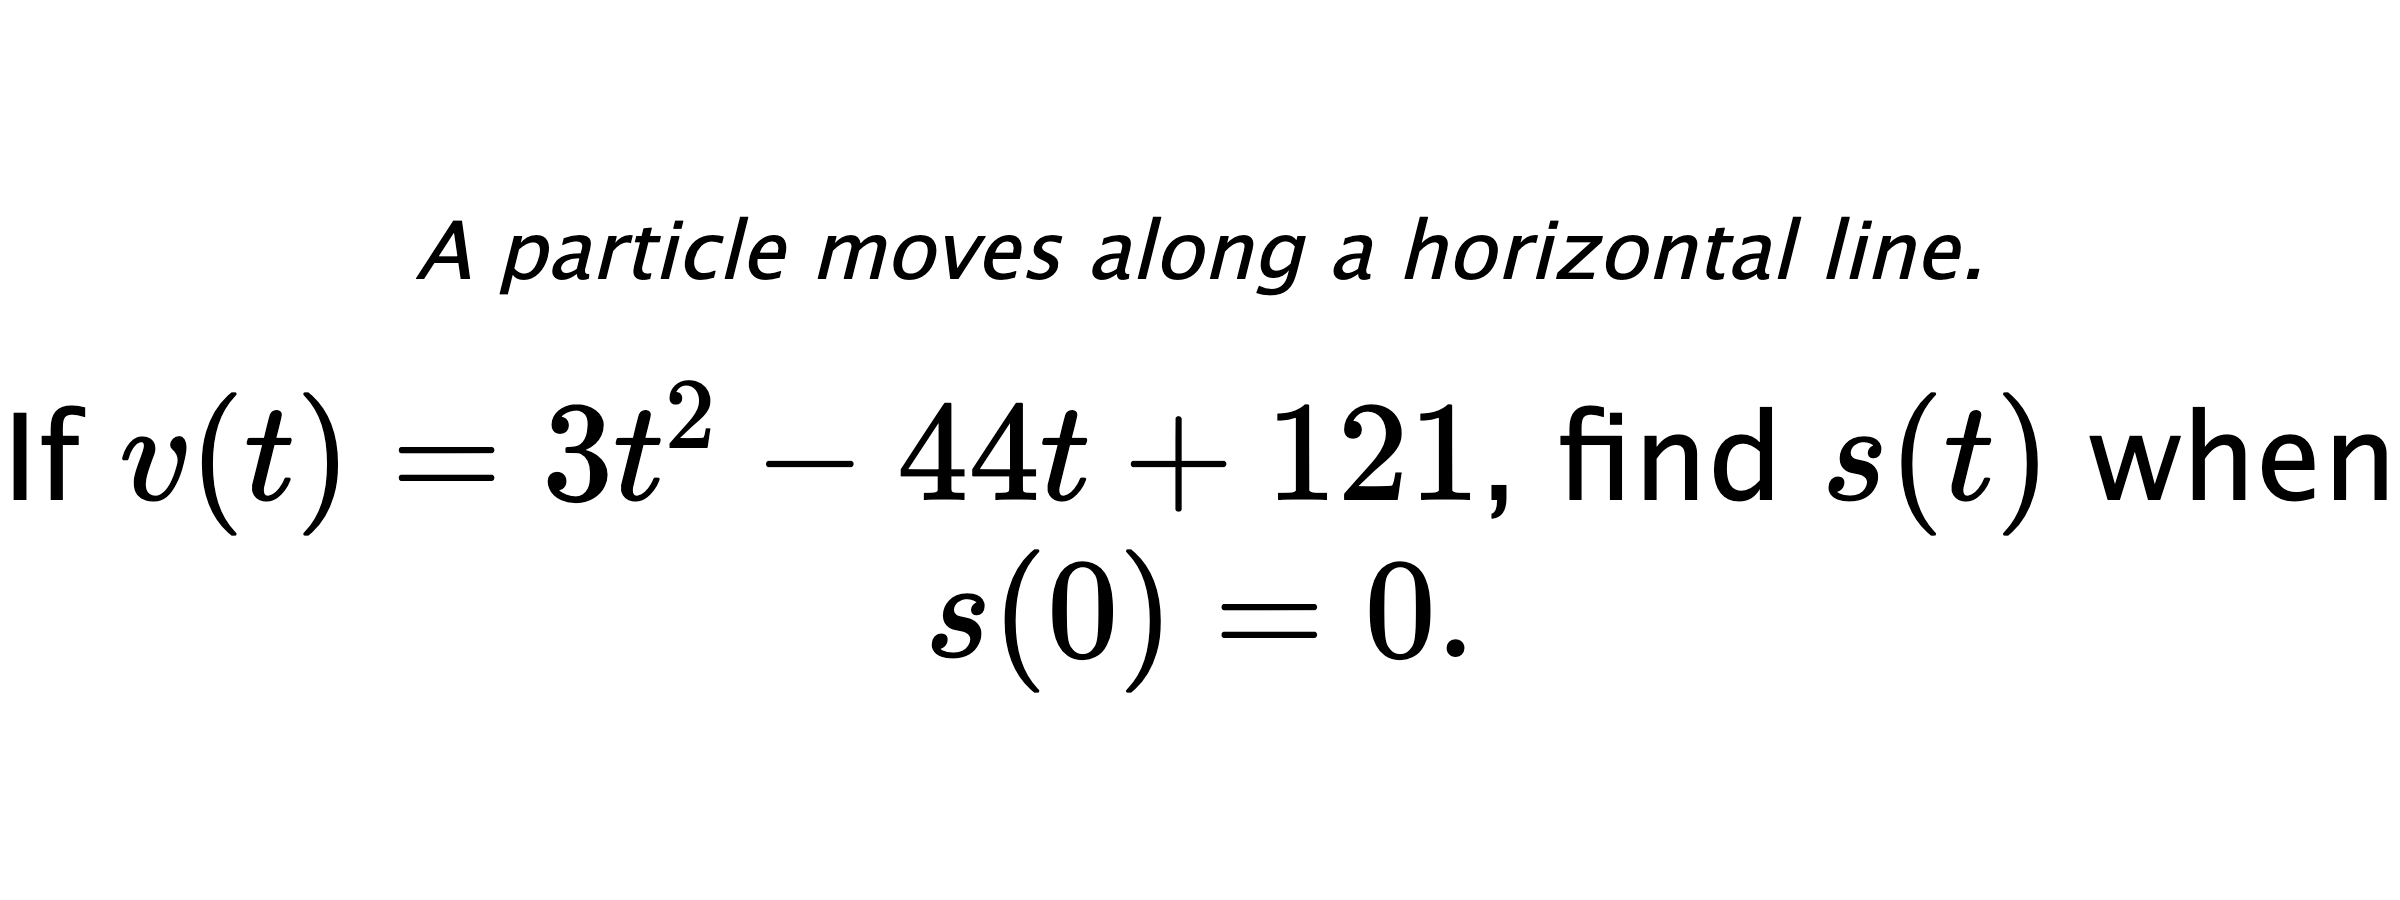 A particle moves along a horizontal line. If $ v(t)=3t^2-44t+121 $, find $ s(t) $ when $ s(0)=0 .$